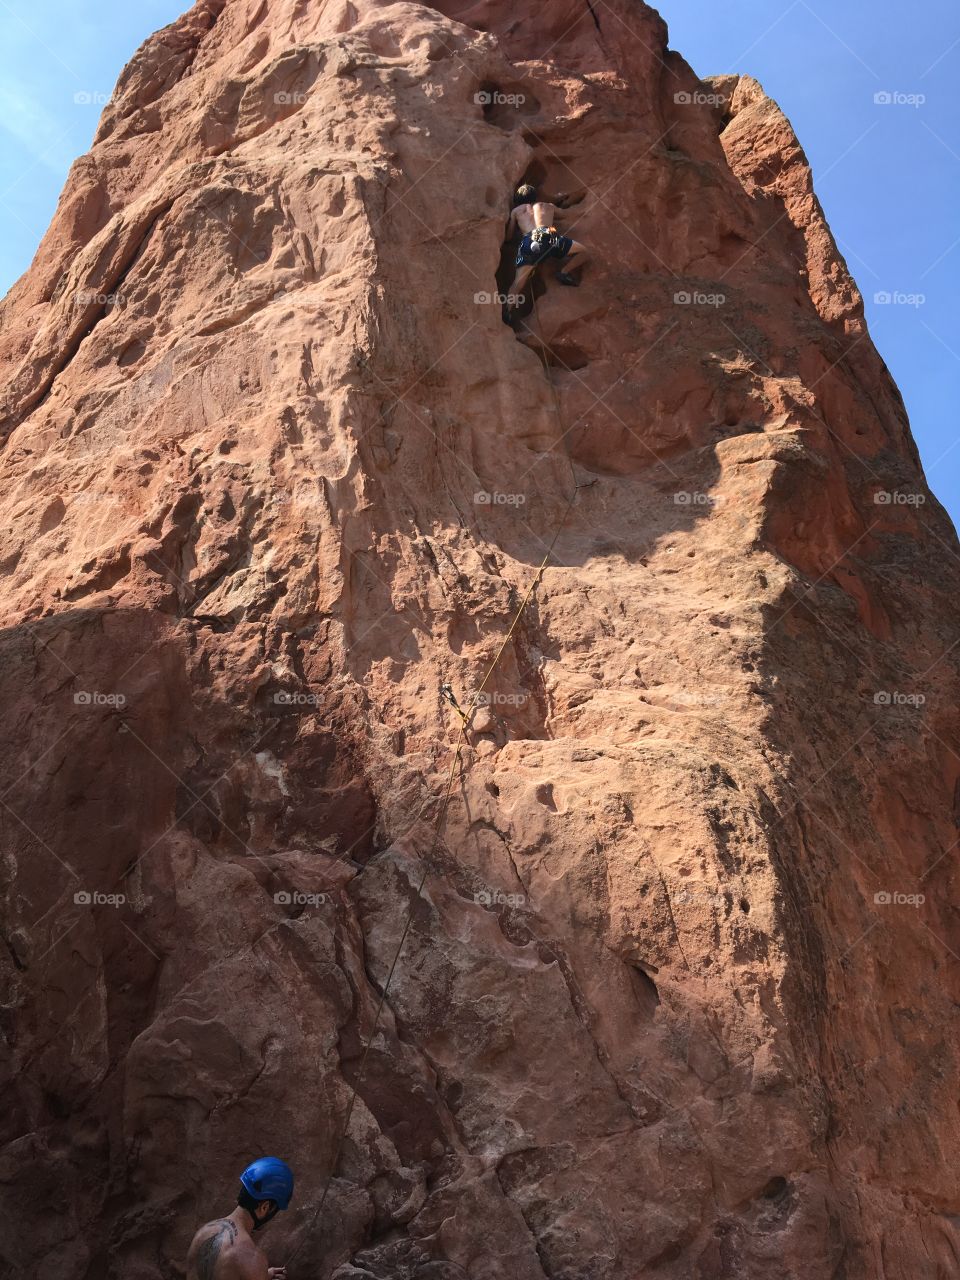 Climber on the red-orange rock of Garden of the Gods with blue sky above